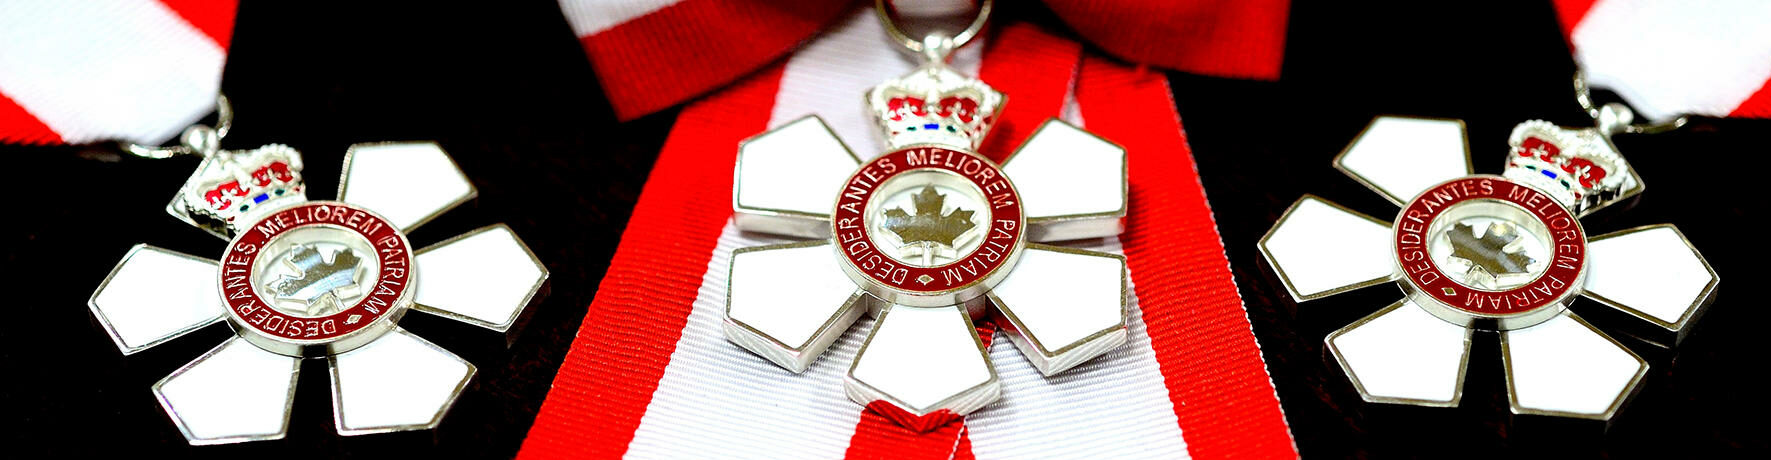 Order of canada medal laid out on black background